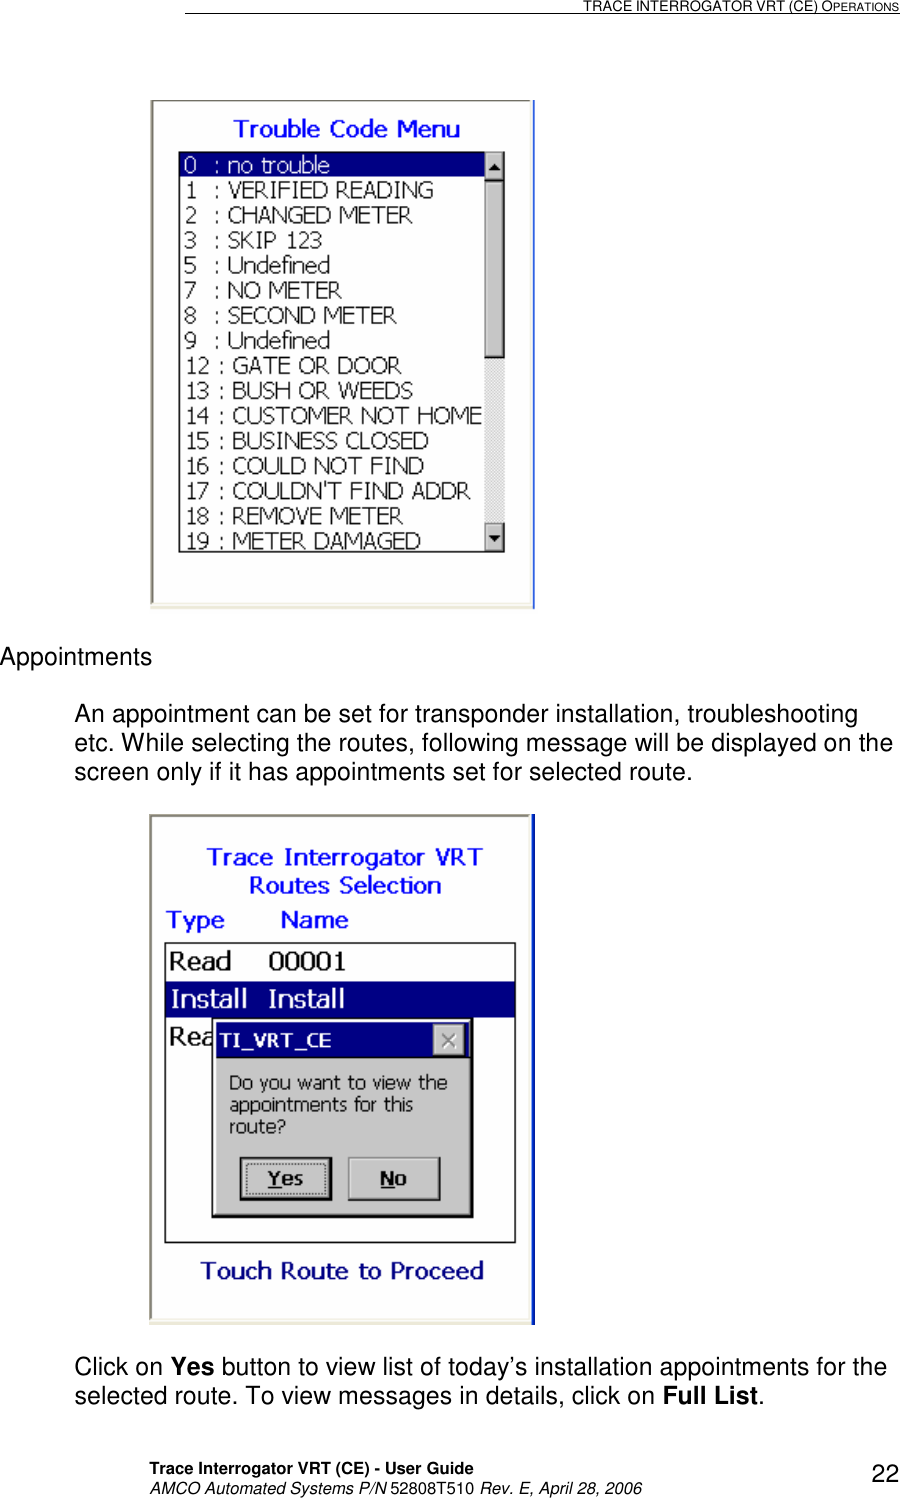                                                                                                                              TRACE INTERROGATOR VRT (CE) OPERATIONS    Trace Interrogator VRT (CE) - User Guide   AMCO Automated Systems P/N 52808T510 Rev. E, April 28, 2006 22  Appointments  An appointment can be set for transponder installation, troubleshooting etc. While selecting the routes, following message will be displayed on the screen only if it has appointments set for selected route.     Click on Yes button to view list of today’s installation appointments for the selected route. To view messages in details, click on Full List. 